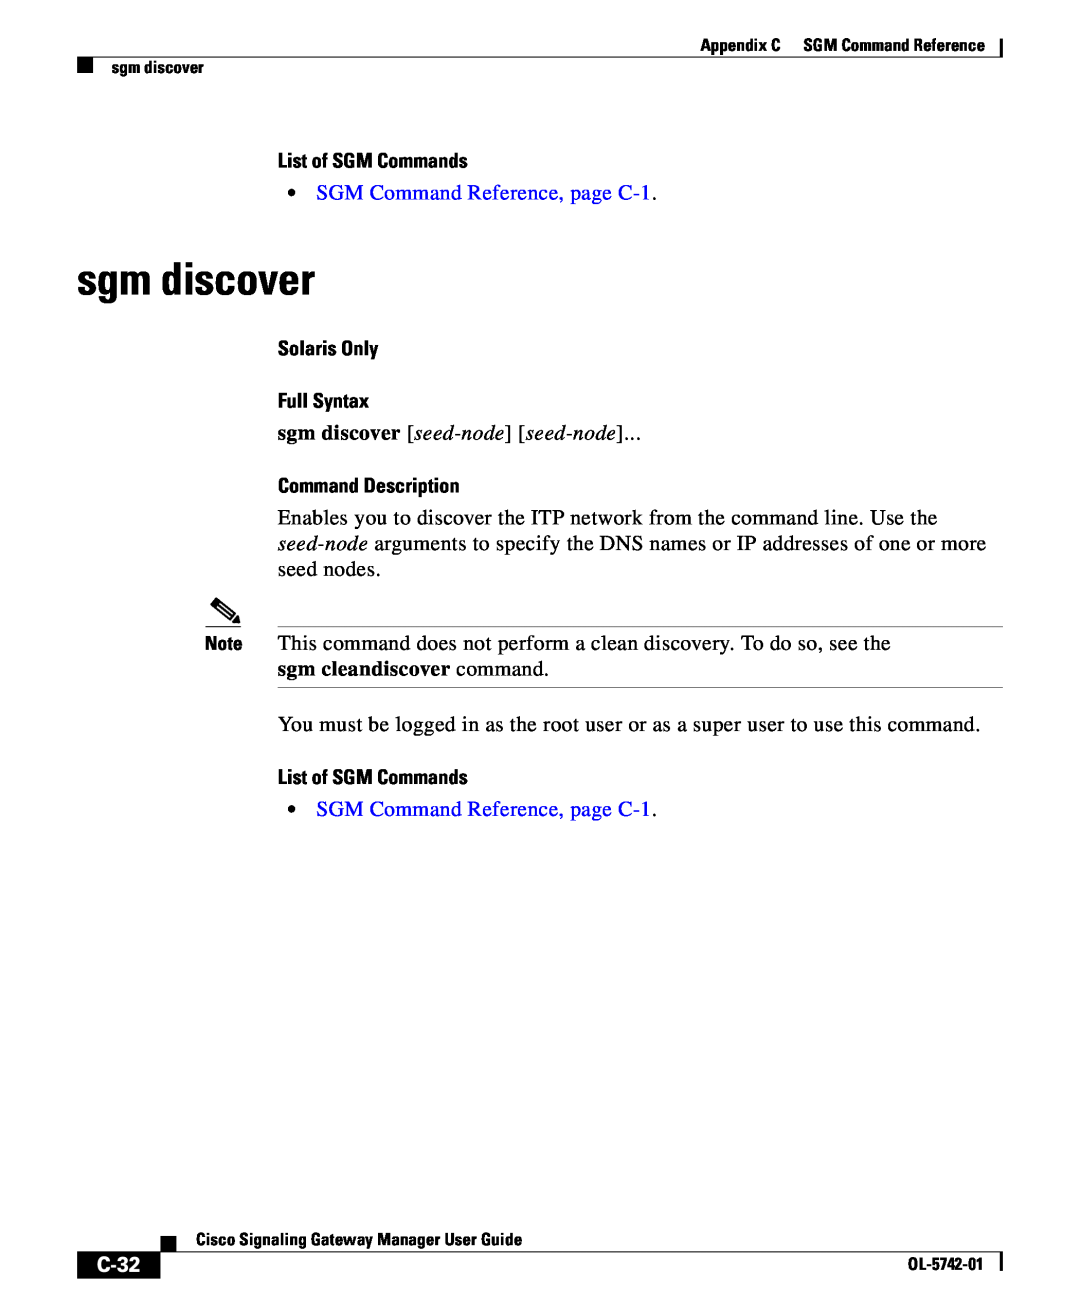 Cisco Systems OL-5742-01 sgm discover seed-node seed-node, C-32, List of SGM Commands, SGM Command Reference, page C-1 